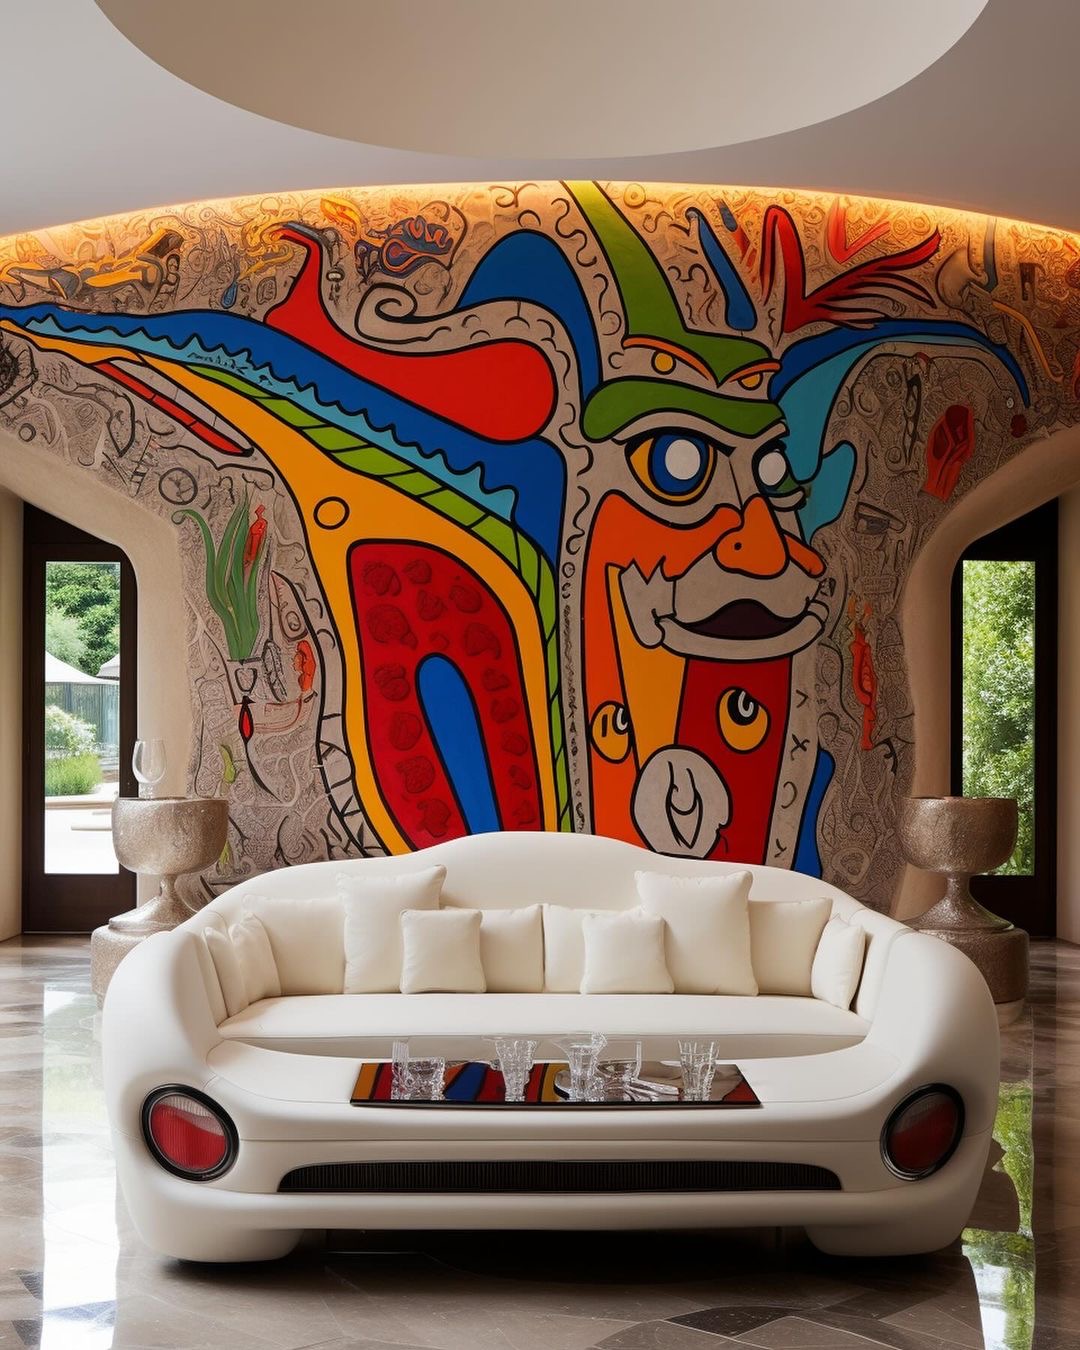 Eclectic Art in Your Modern Dream Home Living Room